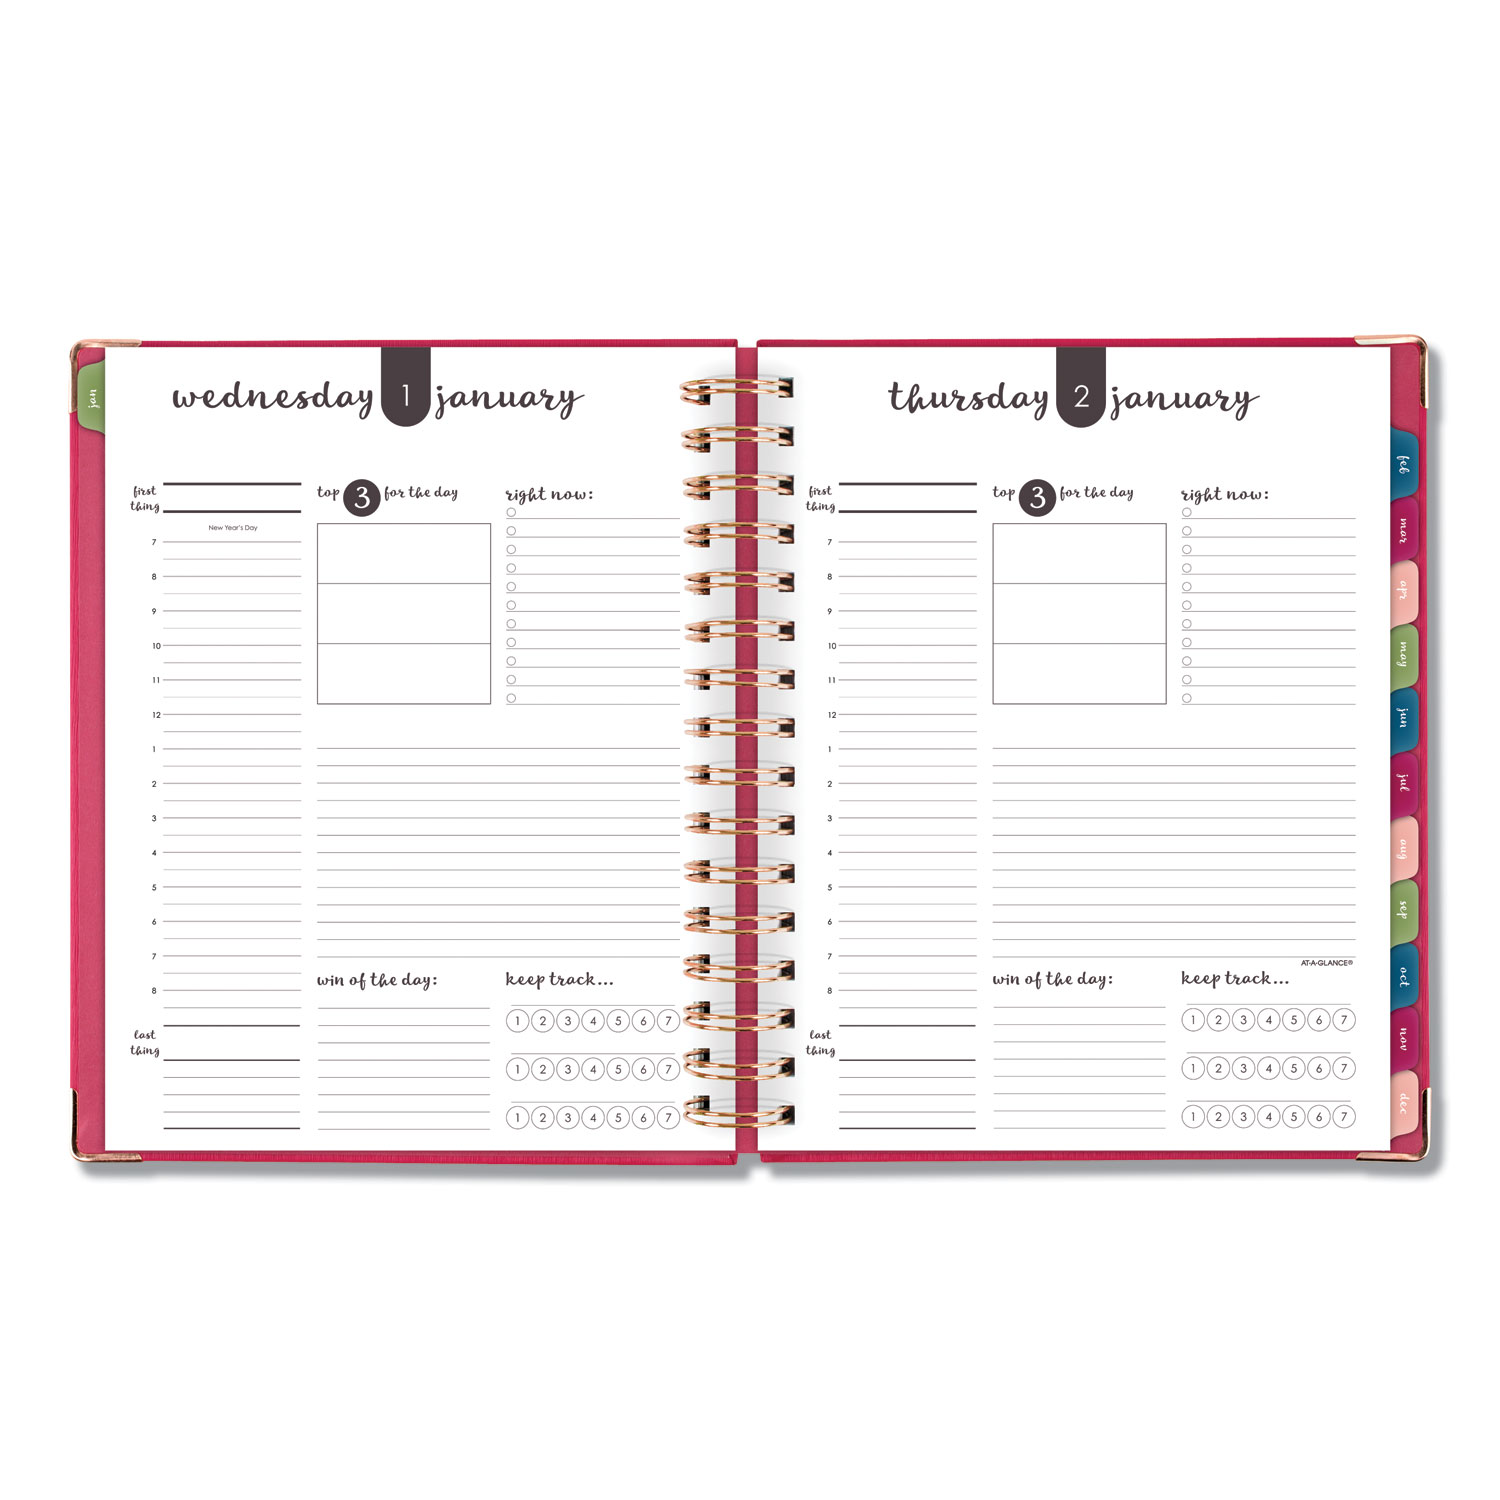 Harmony Daily Hardcover Planner, 8 3/4 x 6 7/8, Berry, 2020